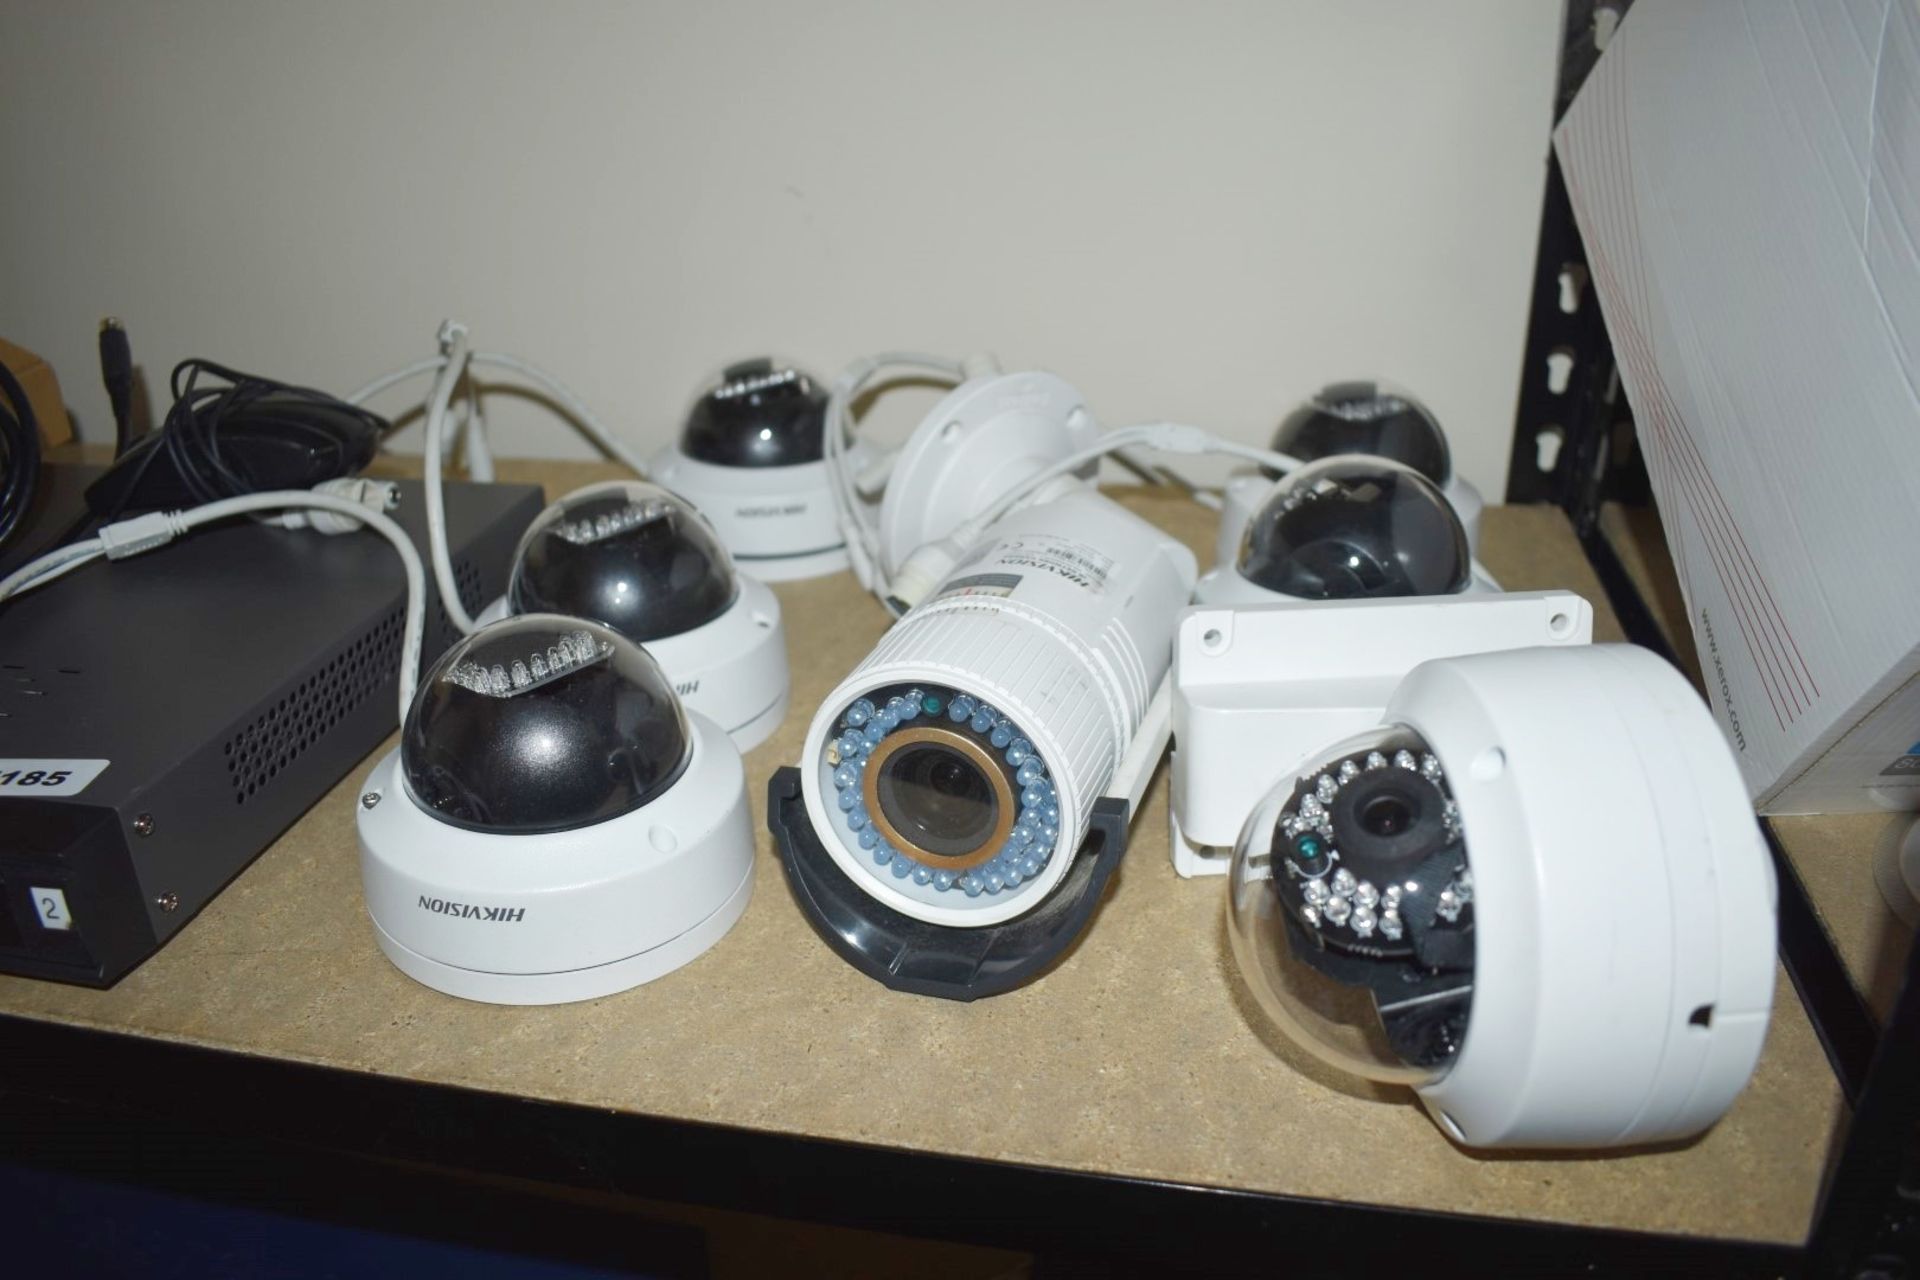 1 x Hikvision Digital CCTV 8 Channel Video Recorder With 7 x Infra Red Network Cameras - Image 2 of 9